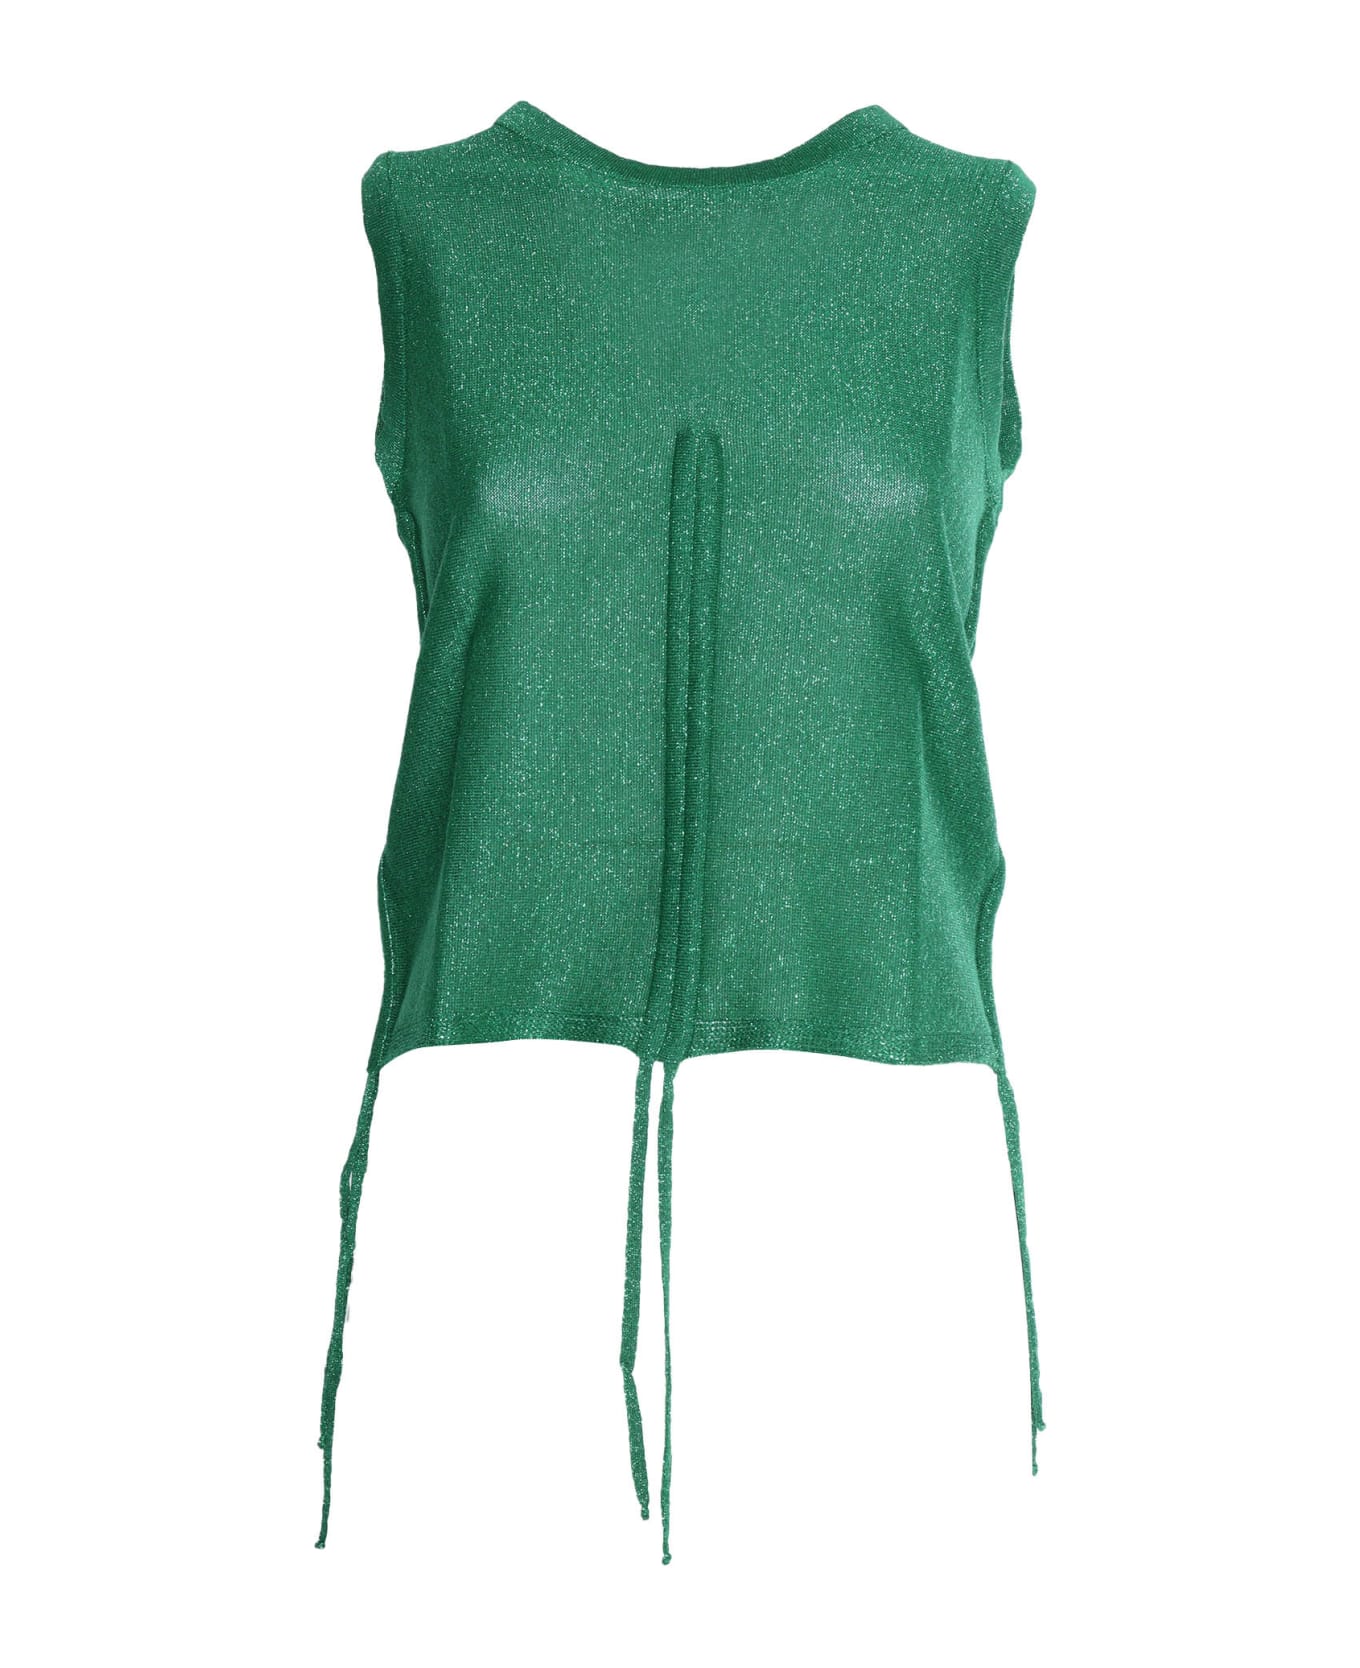 Ermanno Ermanno Scervino Green Knitted Top - GREEN ブラウス